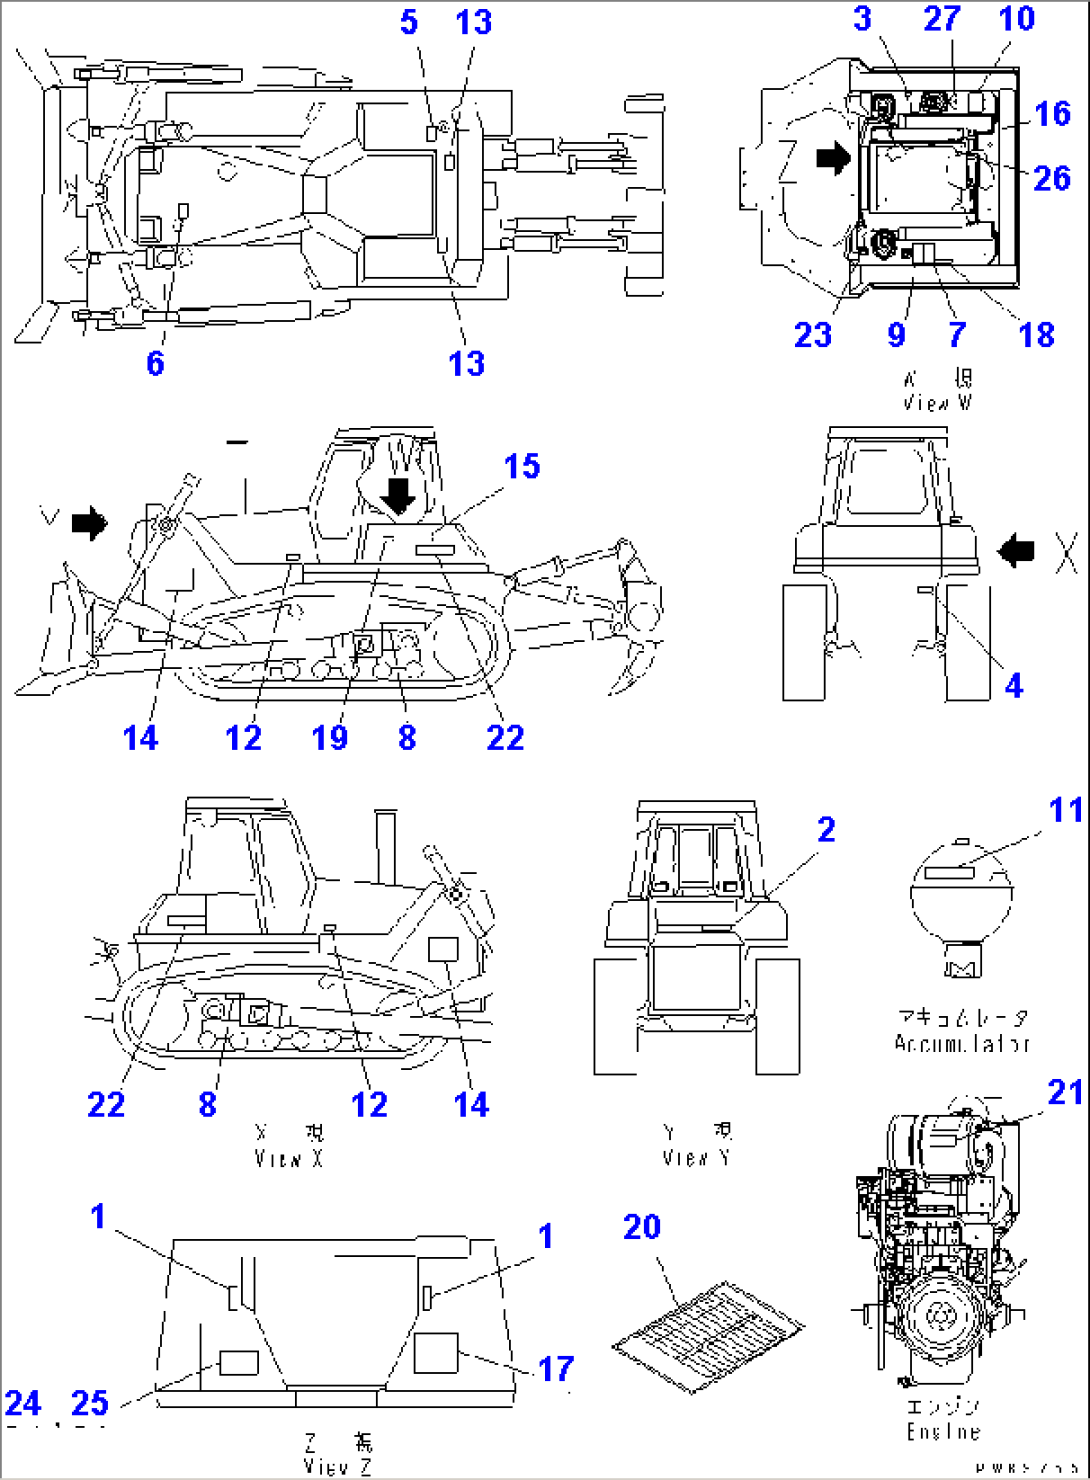 MARKS AND PLATES (PERSIAN)(#70001-74999)